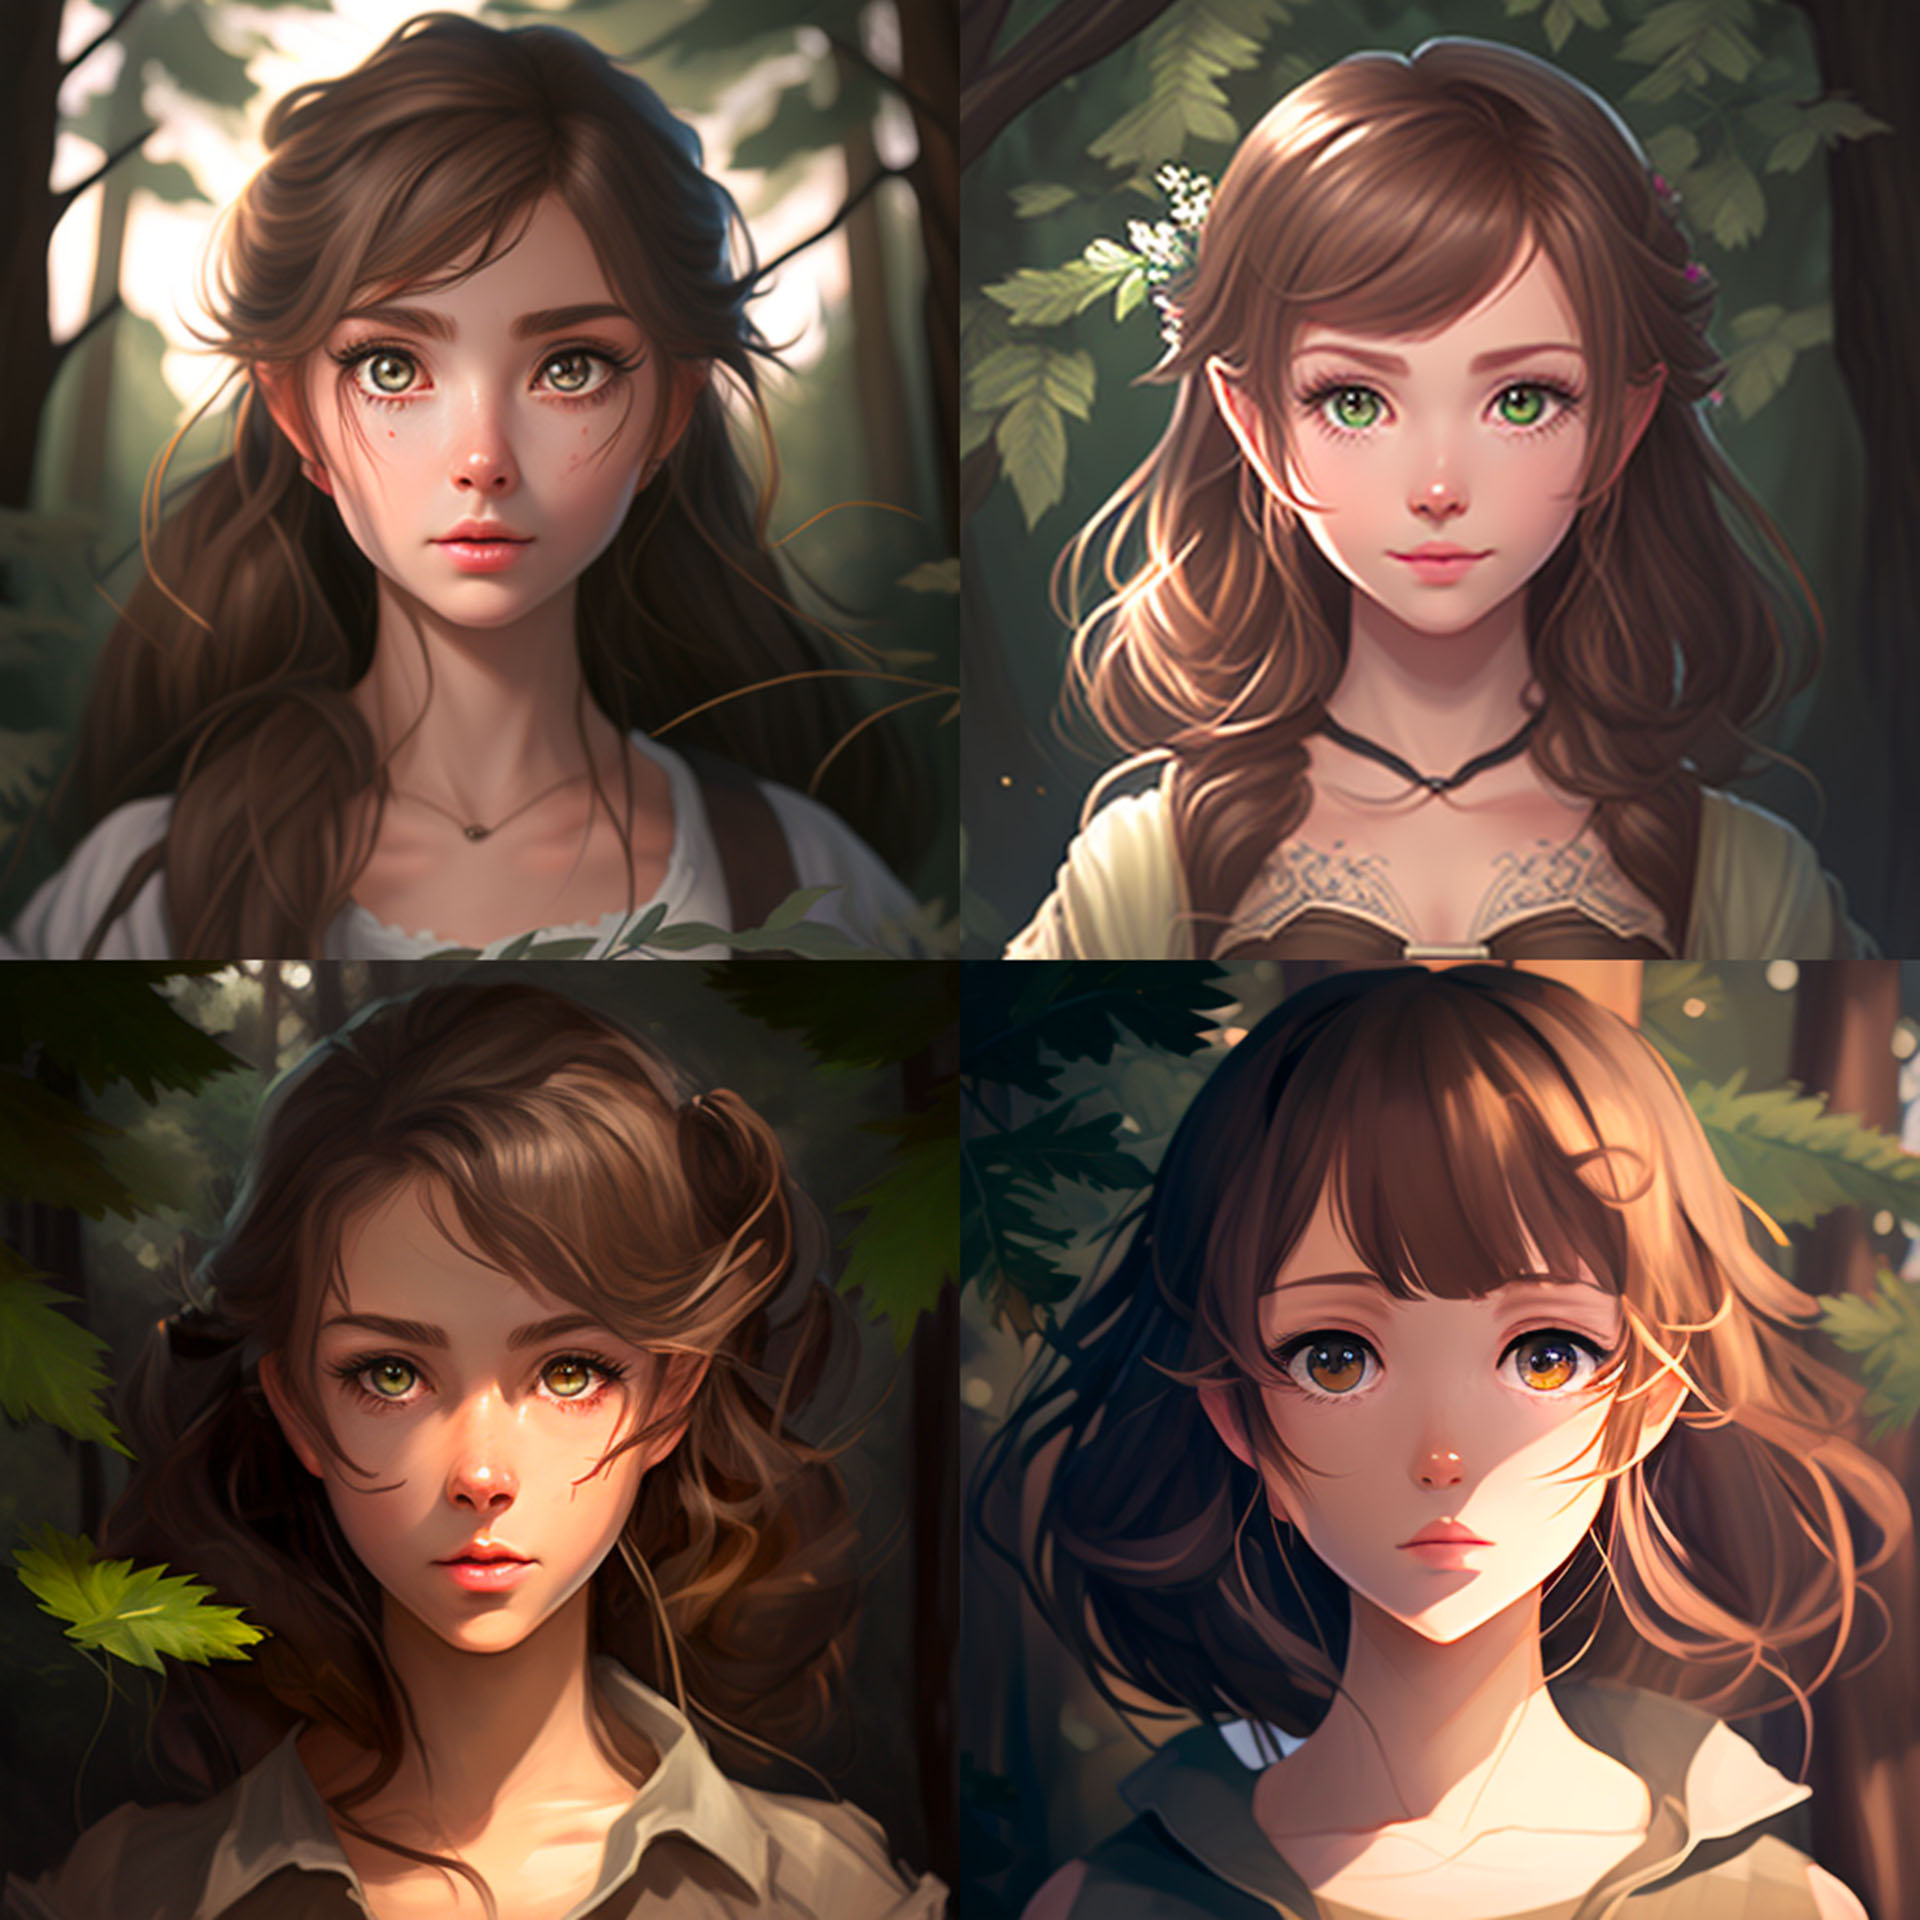 Four AI-generated digital images of an anime-style young girl against a forest backdrop.